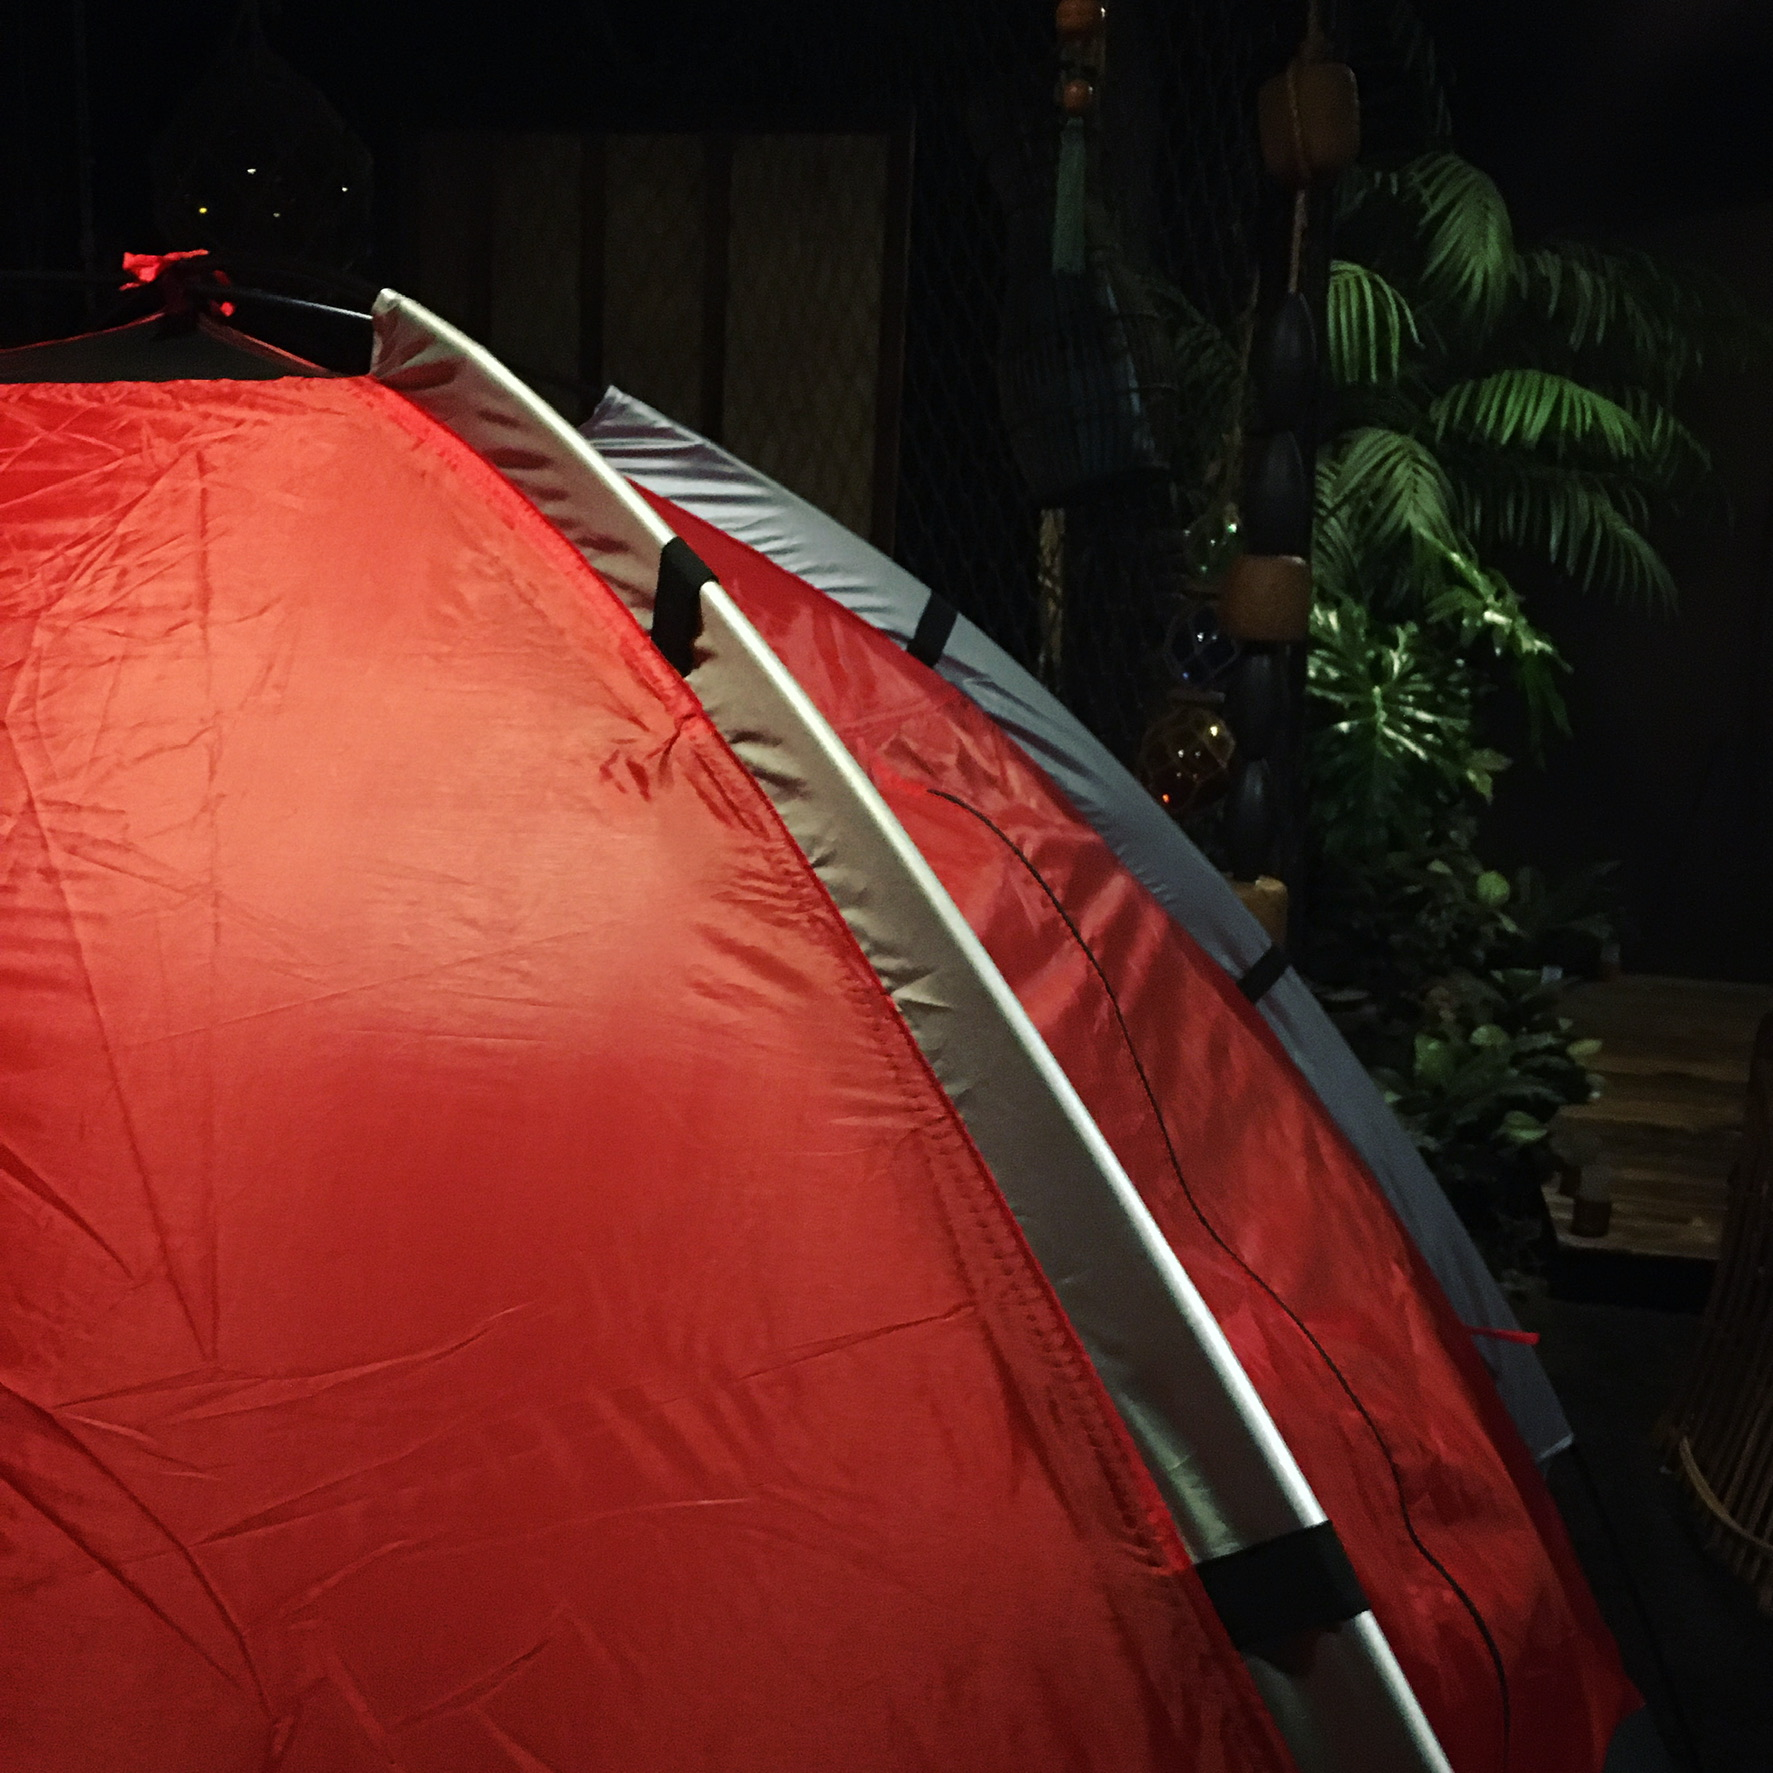 A red tent in a dark room with artificial jungle plants